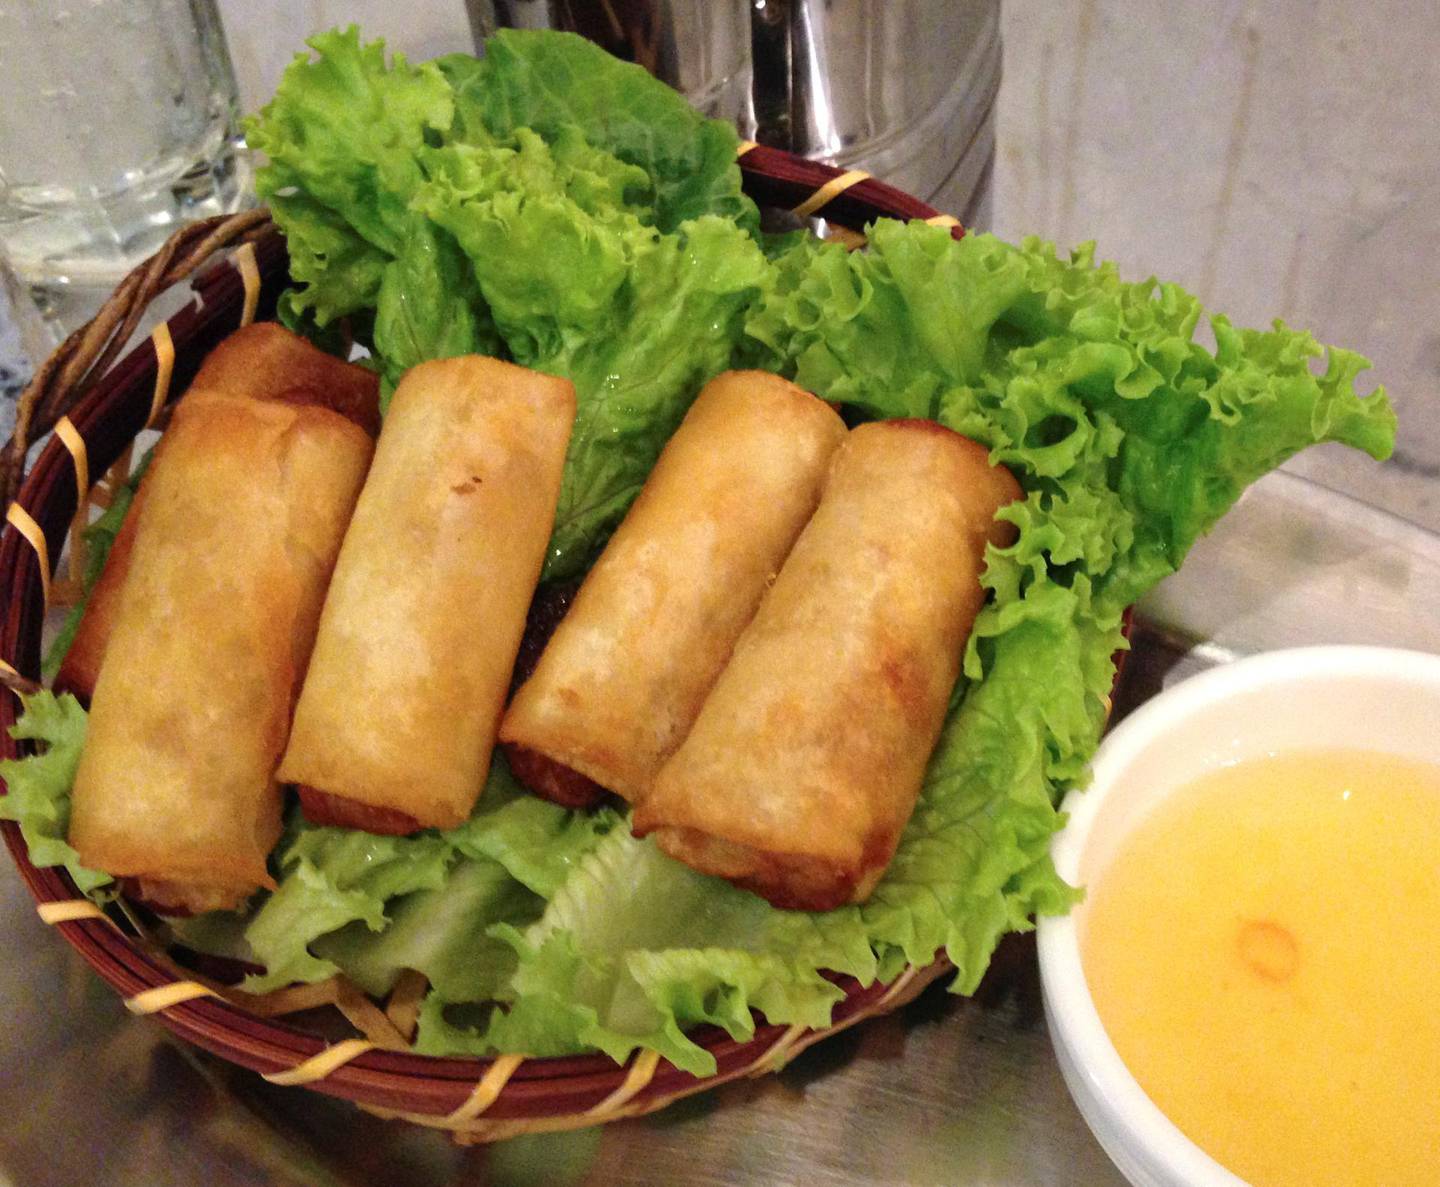 This image shows spring rolls by Co Thanh in Kau U Fong, Central. 15JUN17   Photo: Bernice Chan  [07JULY2017 FEATURES FIRST SERVED] (Photo by Bernice Chan/South China Morning Post via Getty Images)